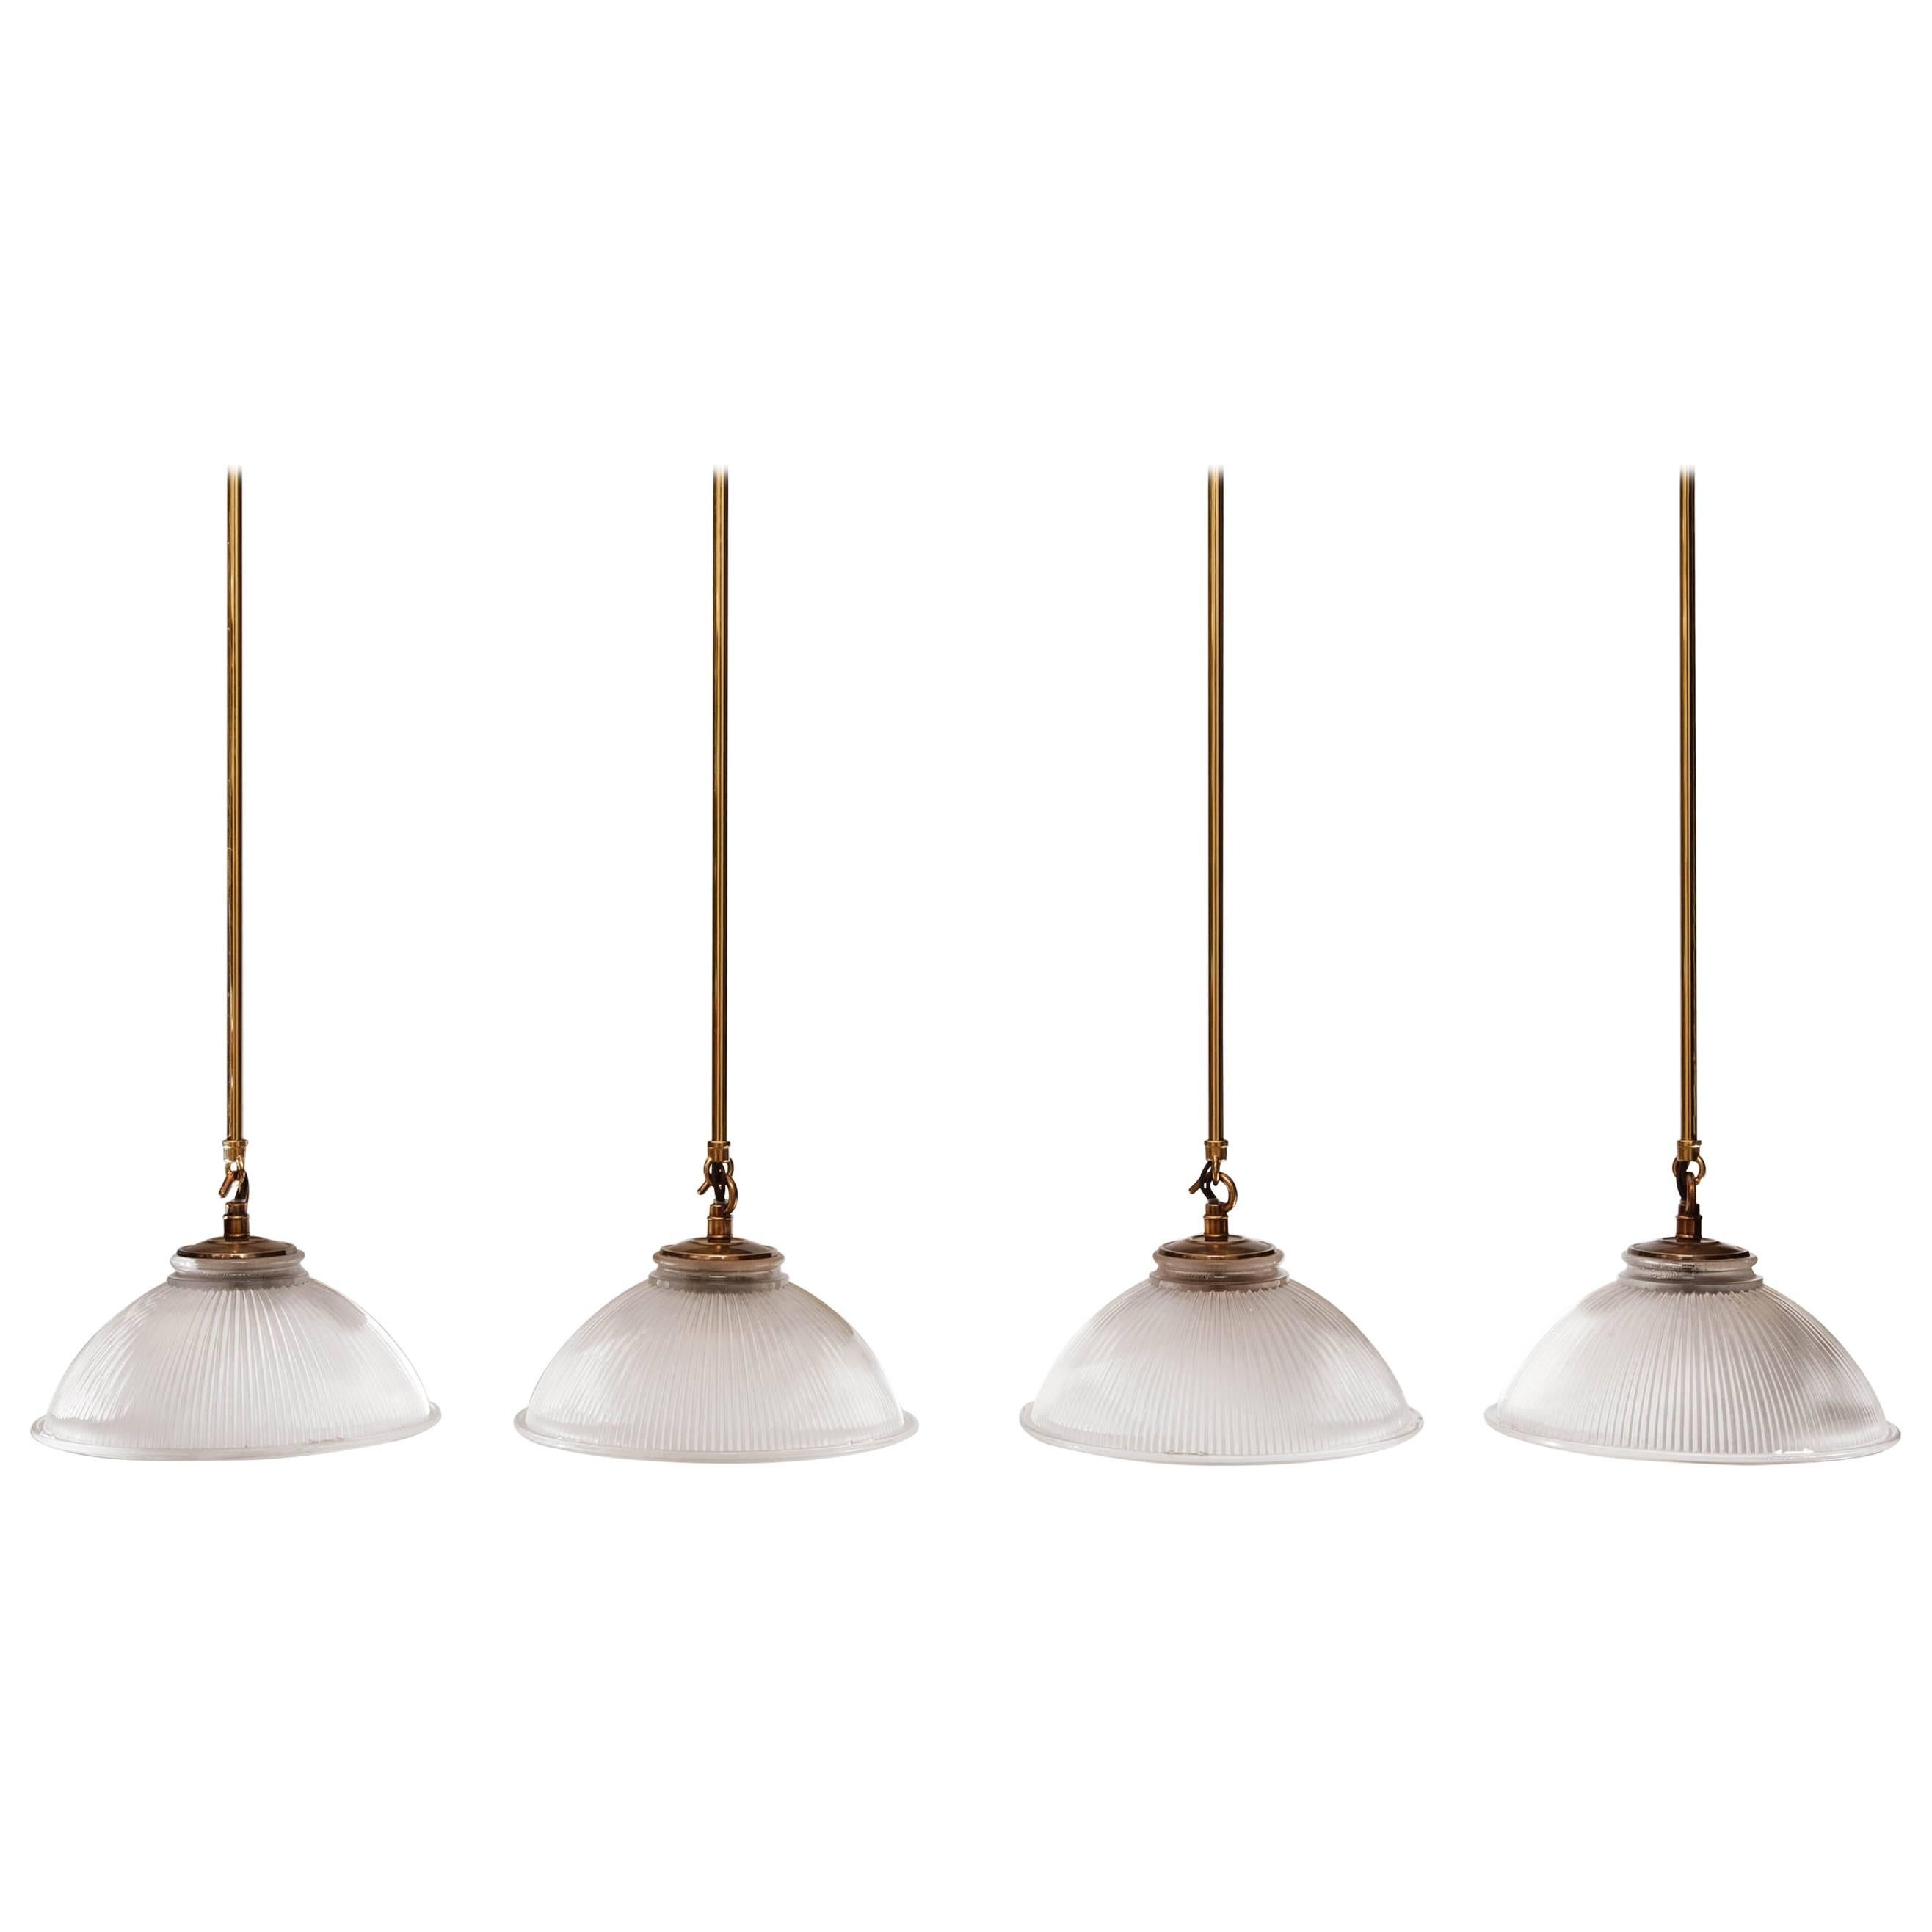 Four Early 20th Century English Holophane Dish Lights with Antiqued Brass Mounts For Sale